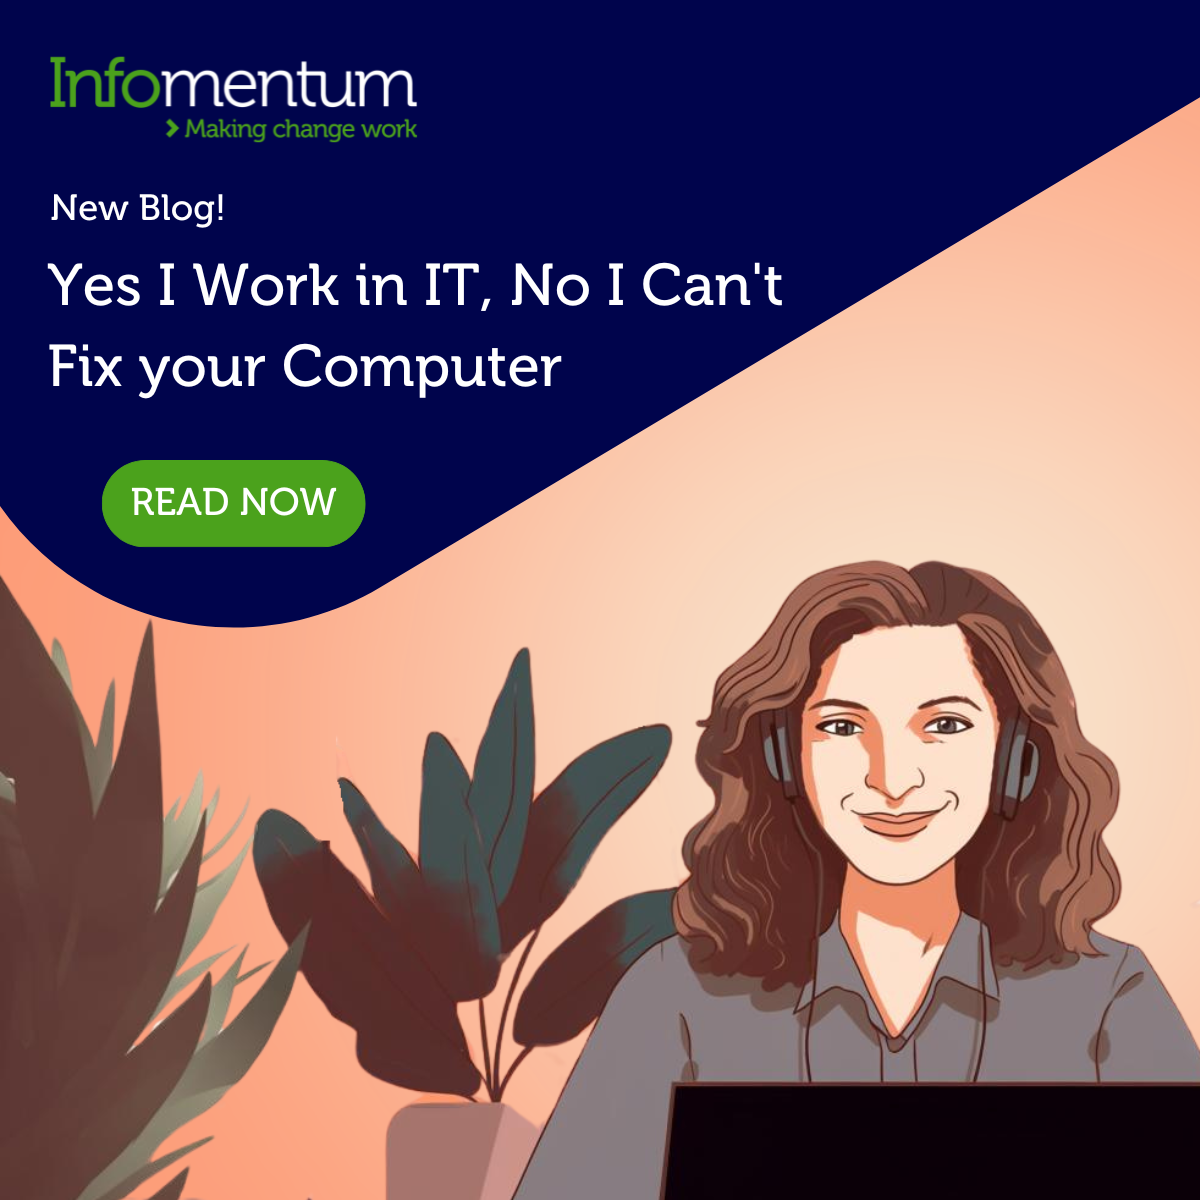 Yes I Work in IT, No I Can't Fix Your Computer